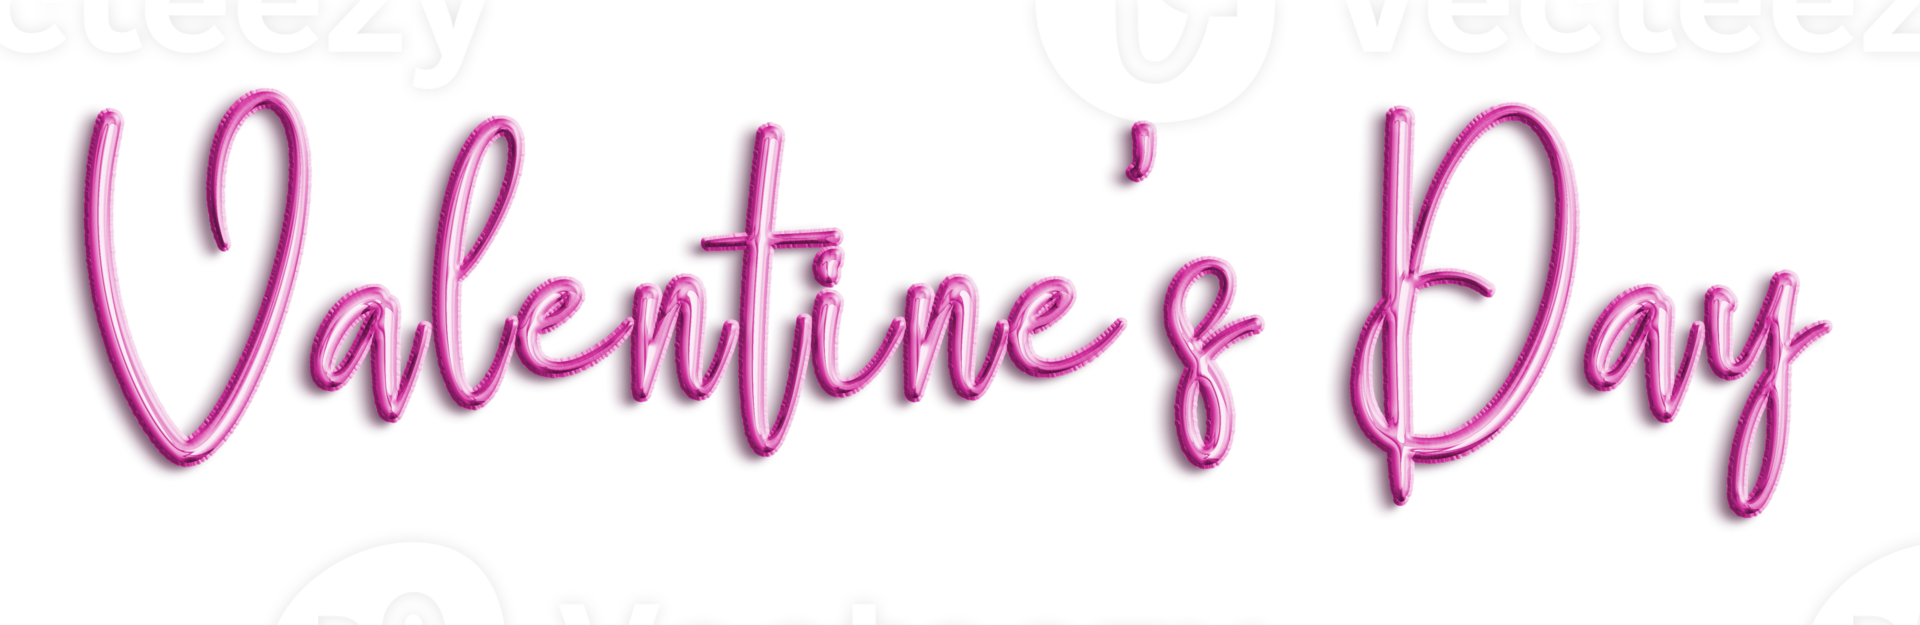 Pink Volumetric 3D Text Balloons Lettering Valentine's Day cut out png